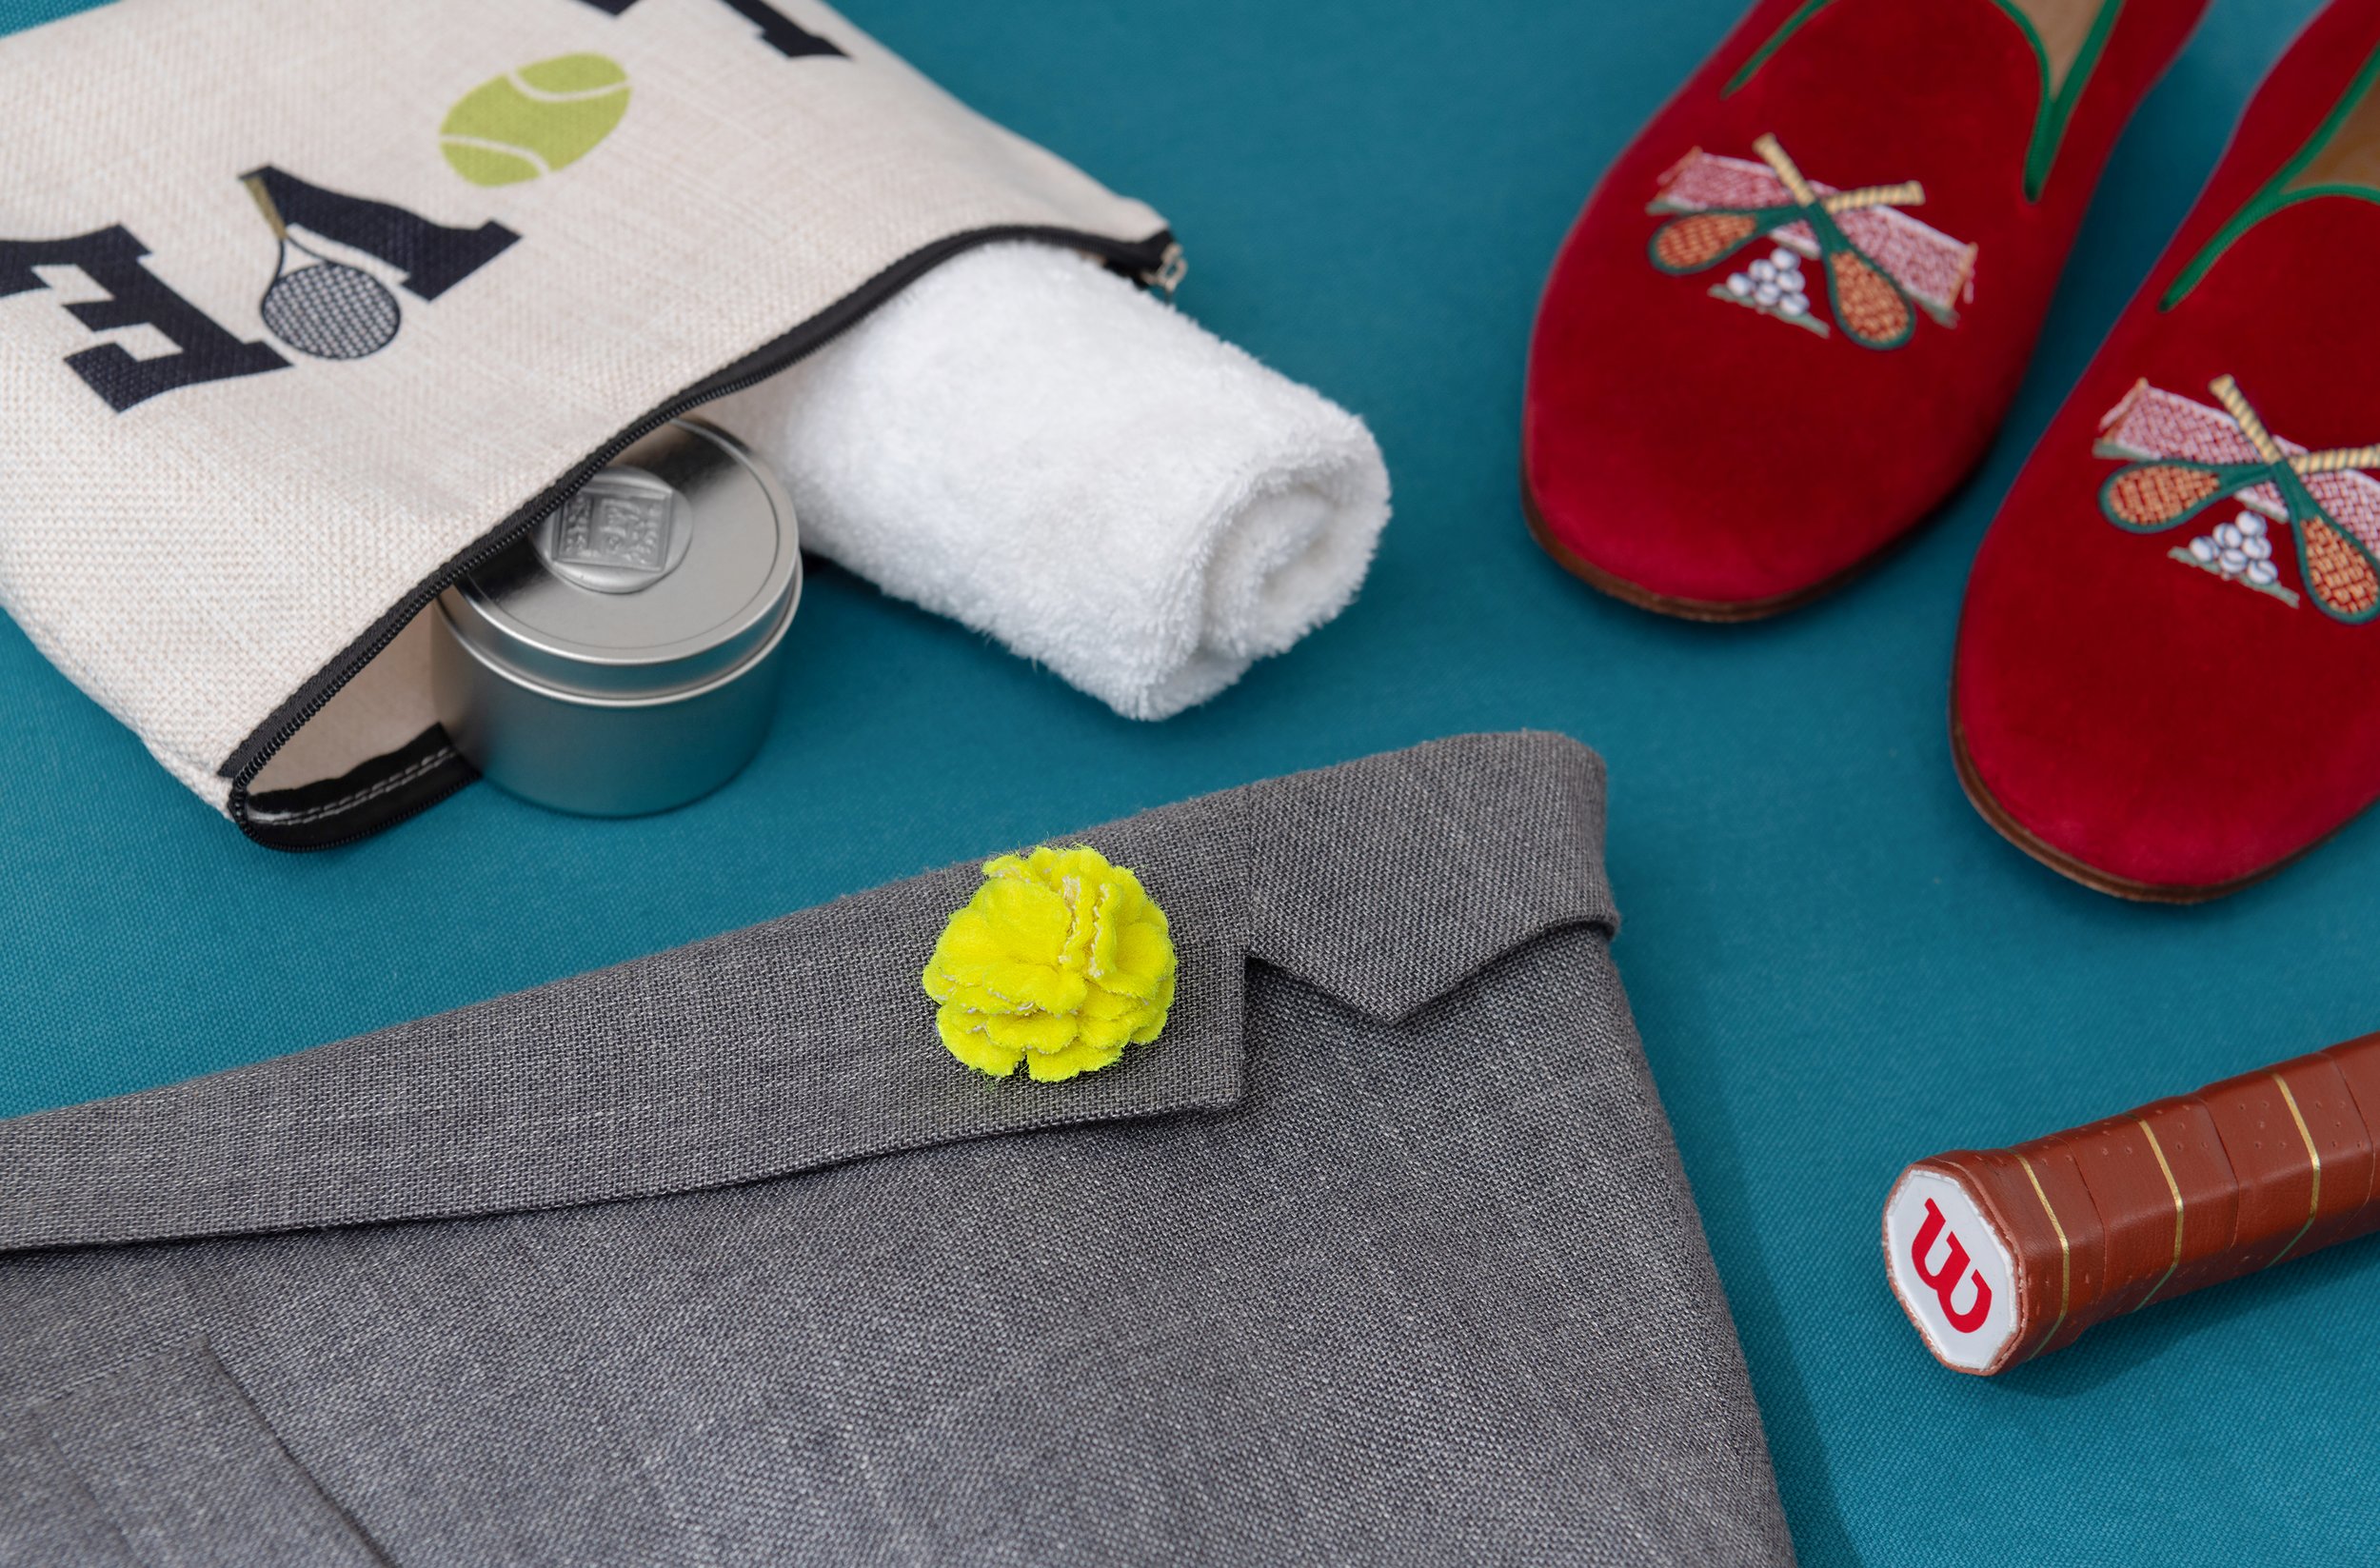 Fleur'd Pins Champion Carnation US Open Tennis Ball Flower lifestyle - photo by Andrew Werner .jpg